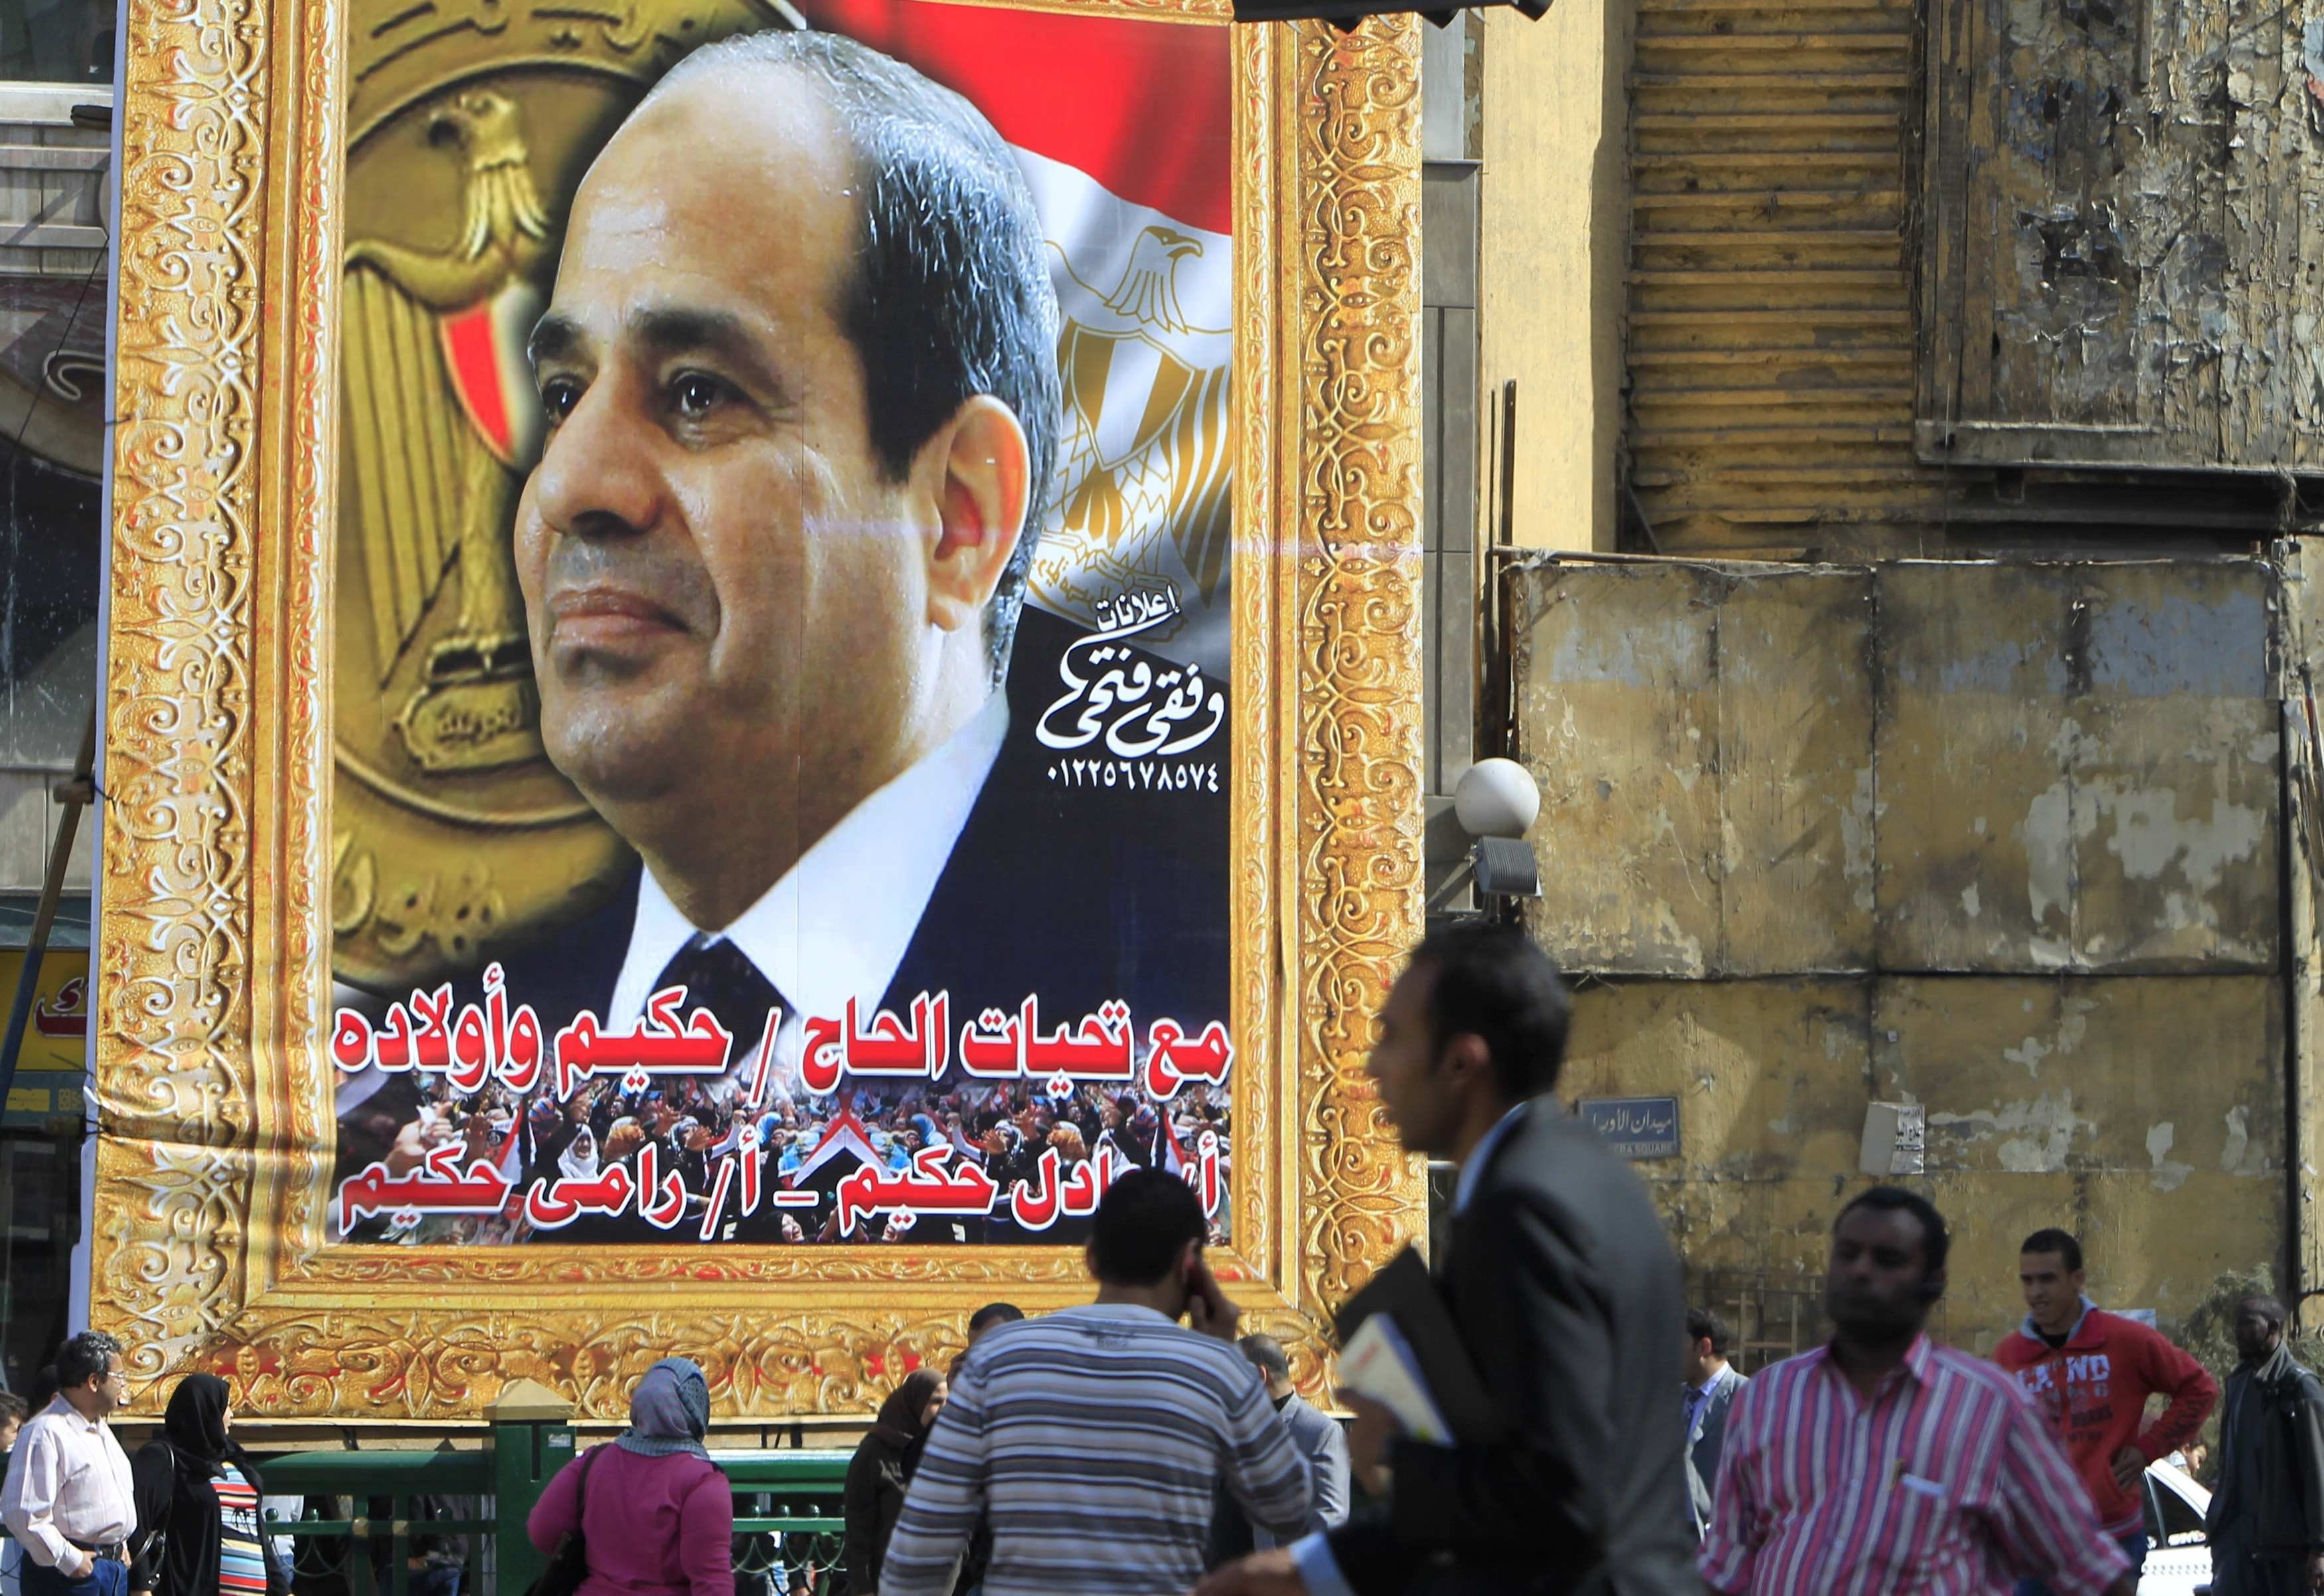 People walk past a banner for Egypt's army chief Field Marshal Abdel Fattah al-Sisi in downtown Cairo March 26, 2014. (Mohamed Abd El Ghany—Reuters)